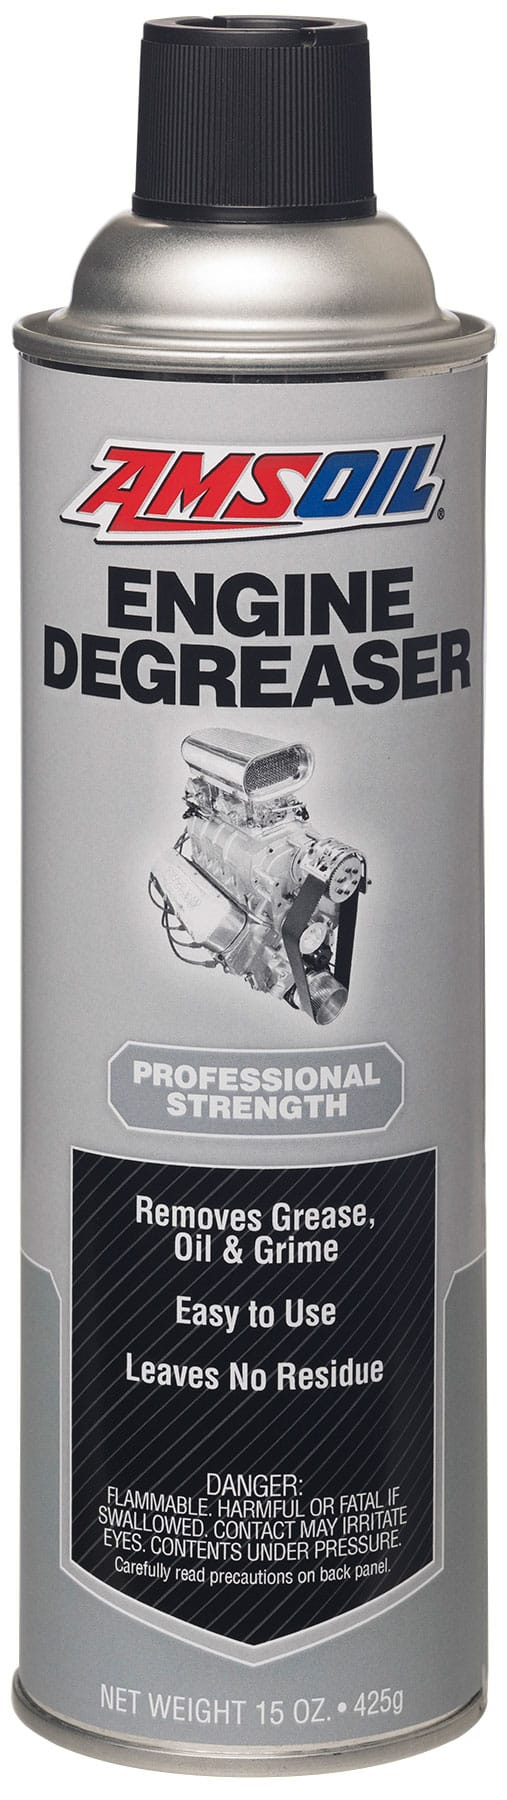 Engine Degreaser AEDSC